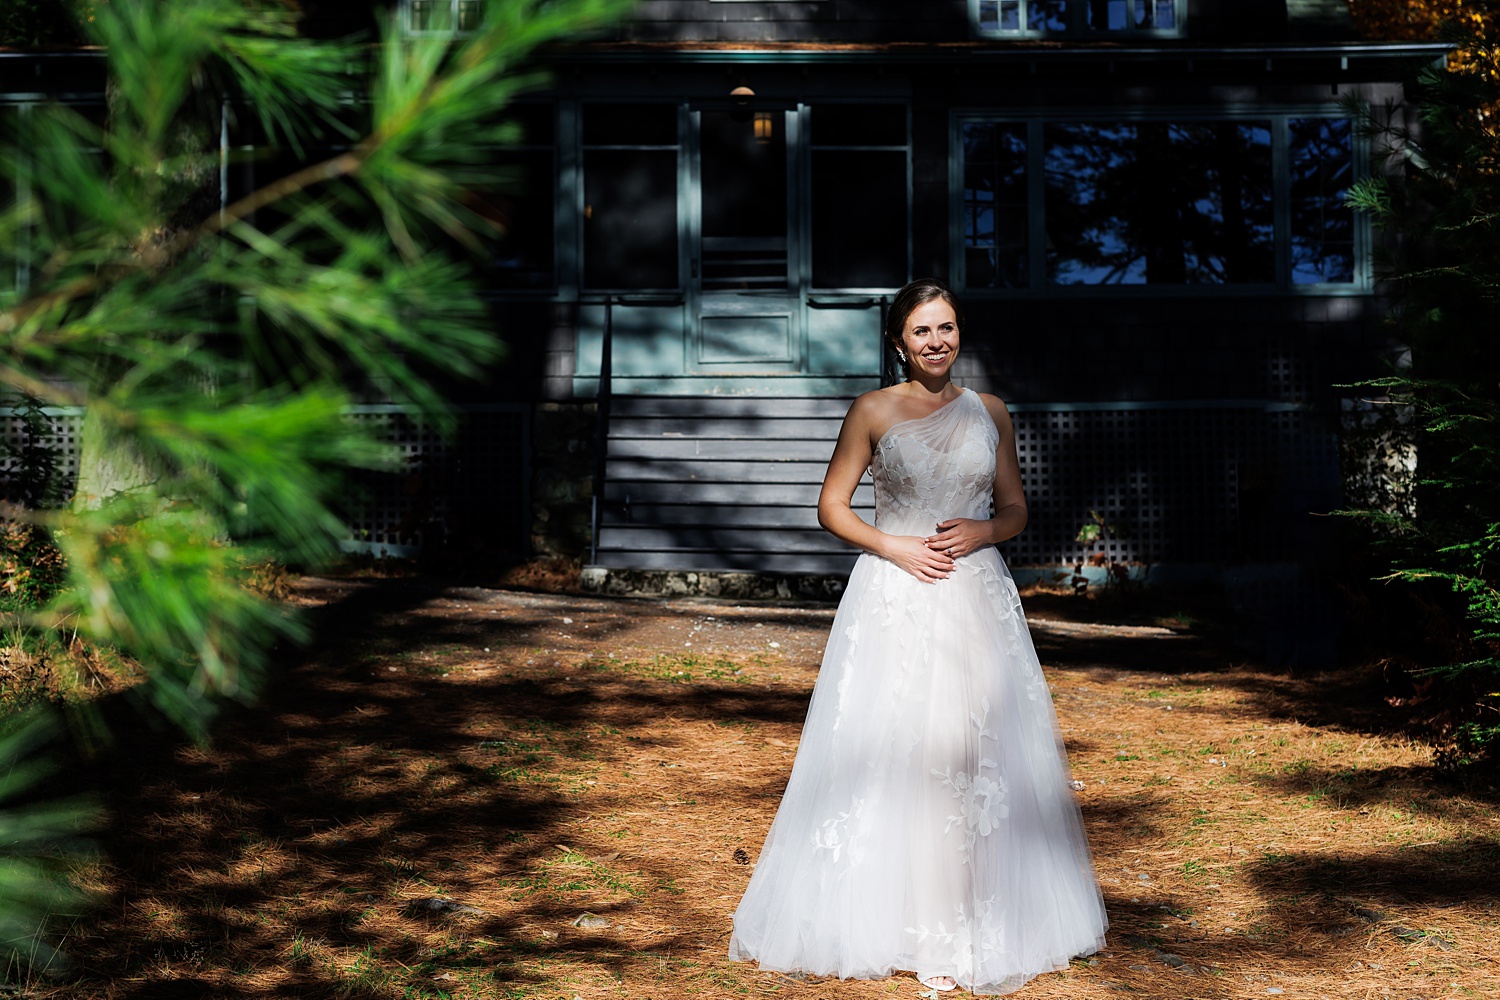 The bride in her wedding dress in front of her cabin on the wedding day